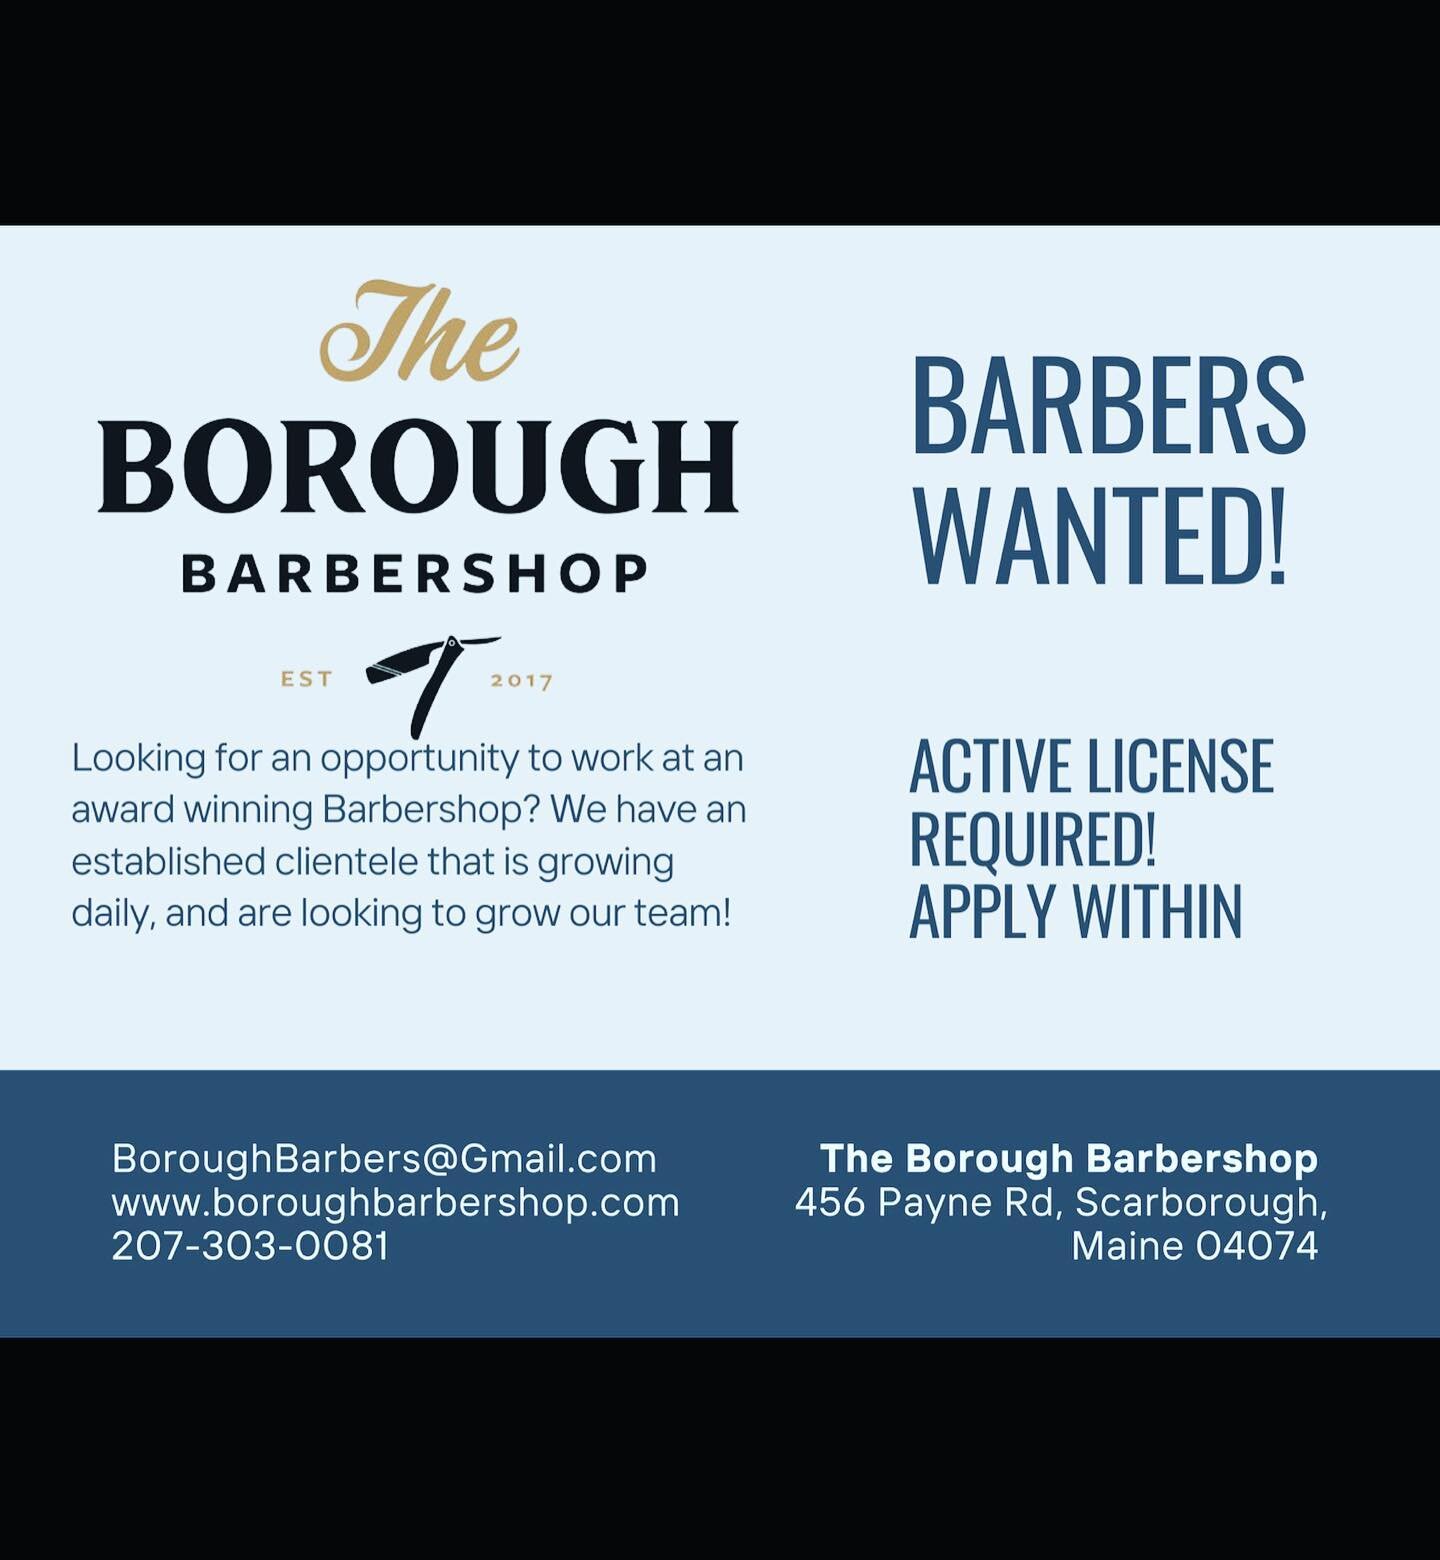 Looking to join a new shop?! The Borough Barbershop is looking to hire multiple full time barbers ASAP! We offer both traditional booth rent or percentage based rent, while still suppling our barbers with all the basic necessities. Razors, neck strip